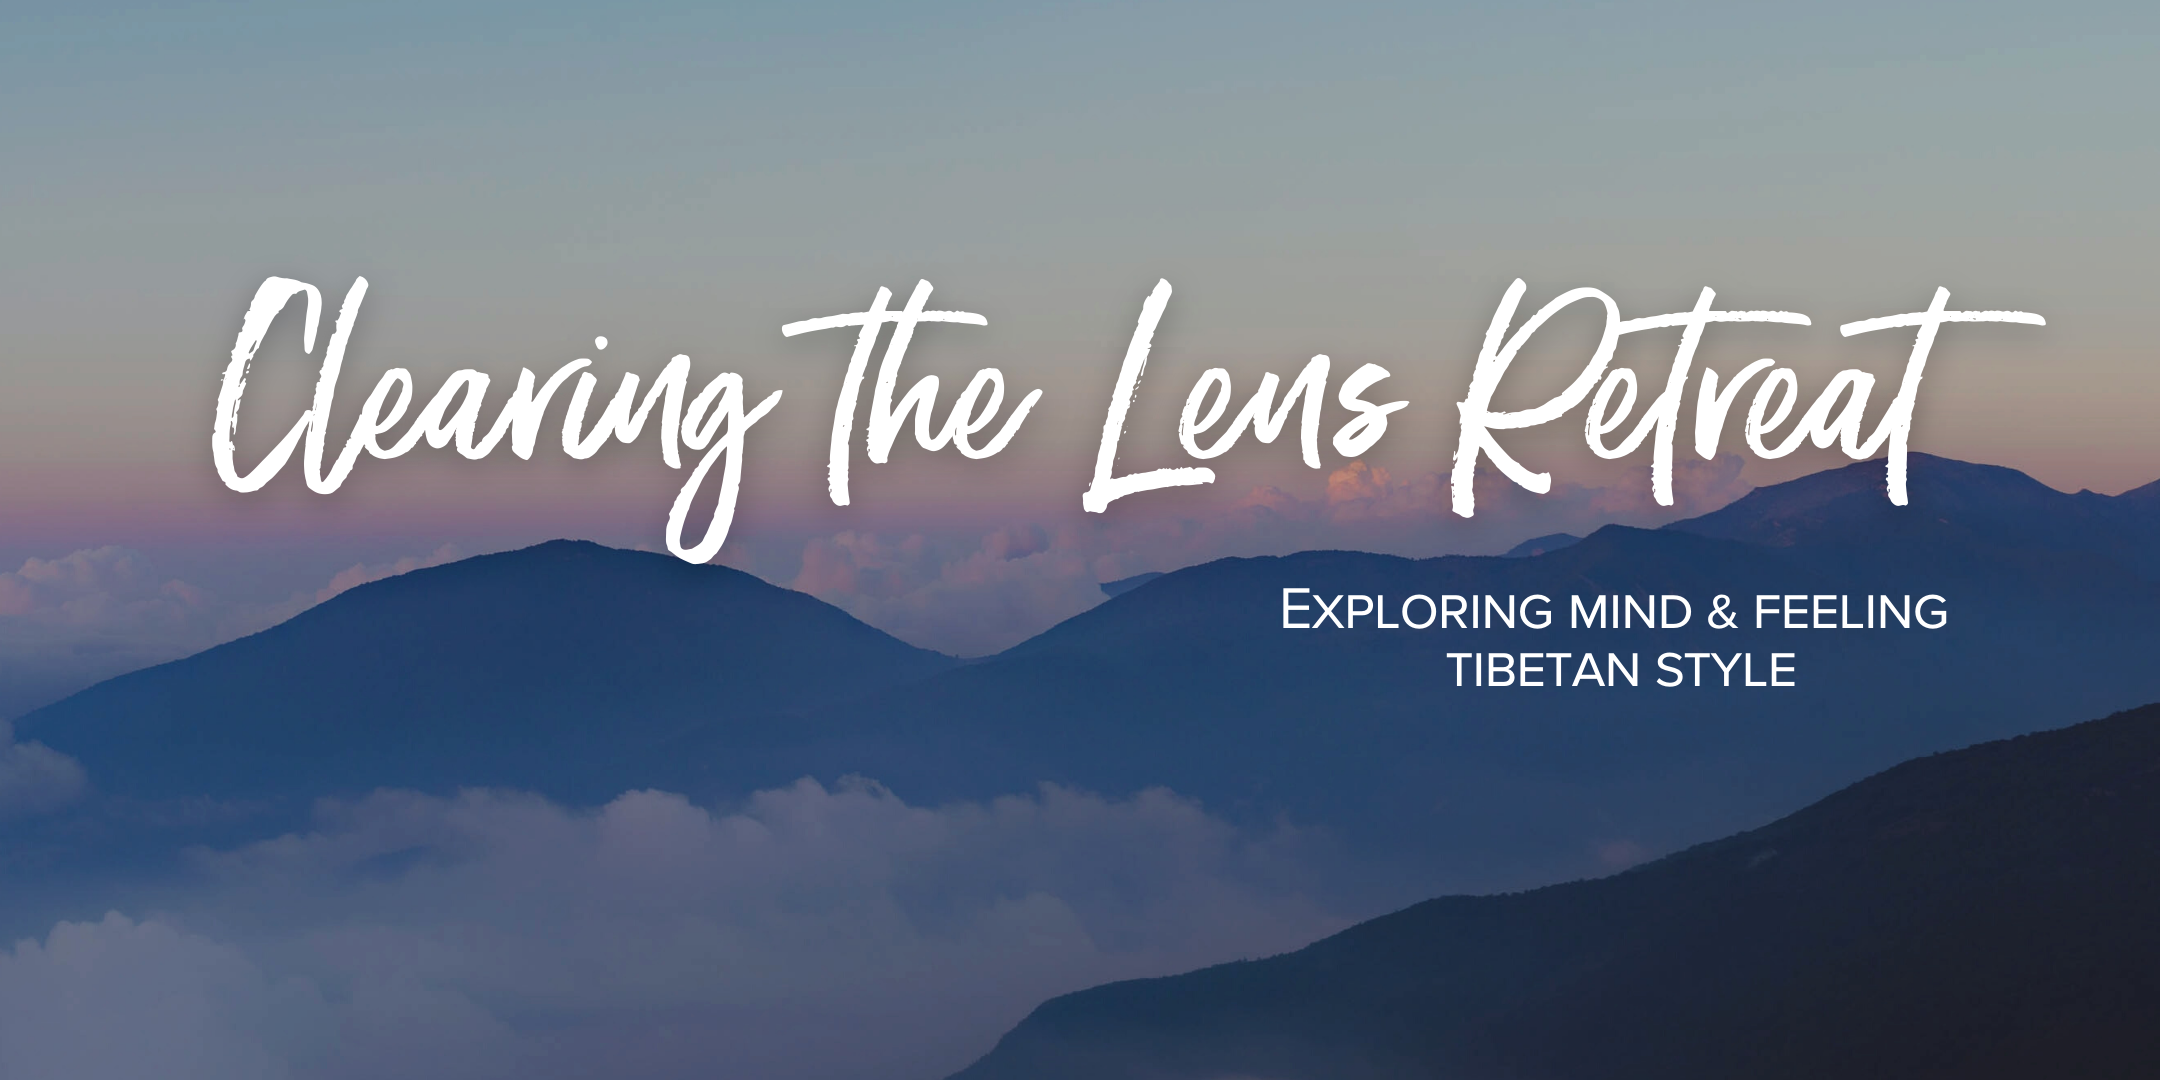 Clearing the lens retreat